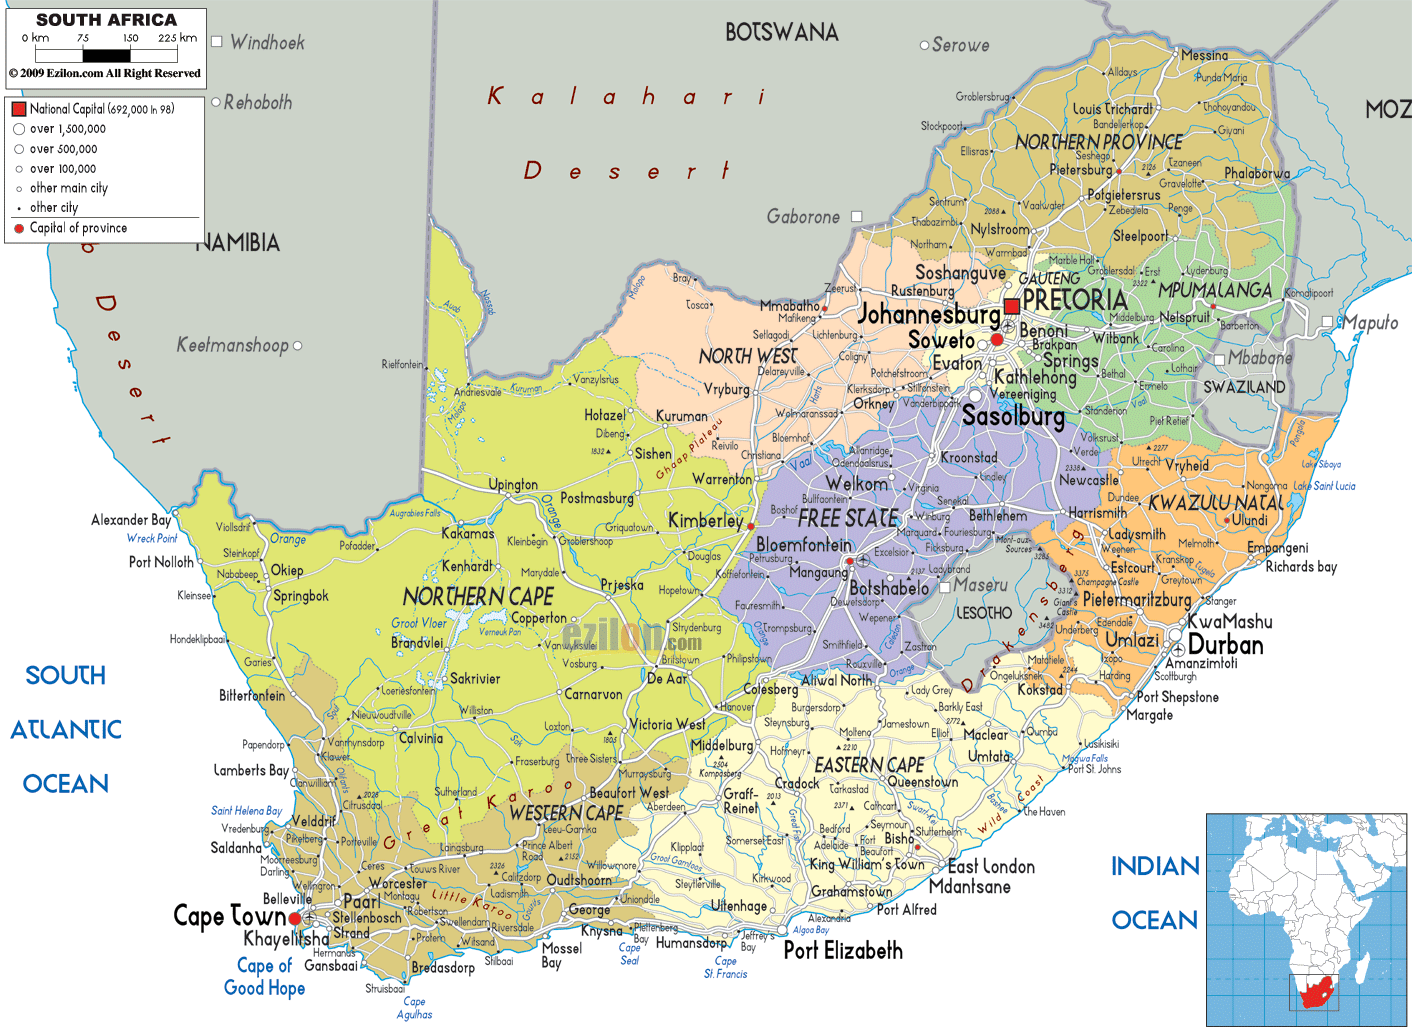 South Africa Political Map - United States Map